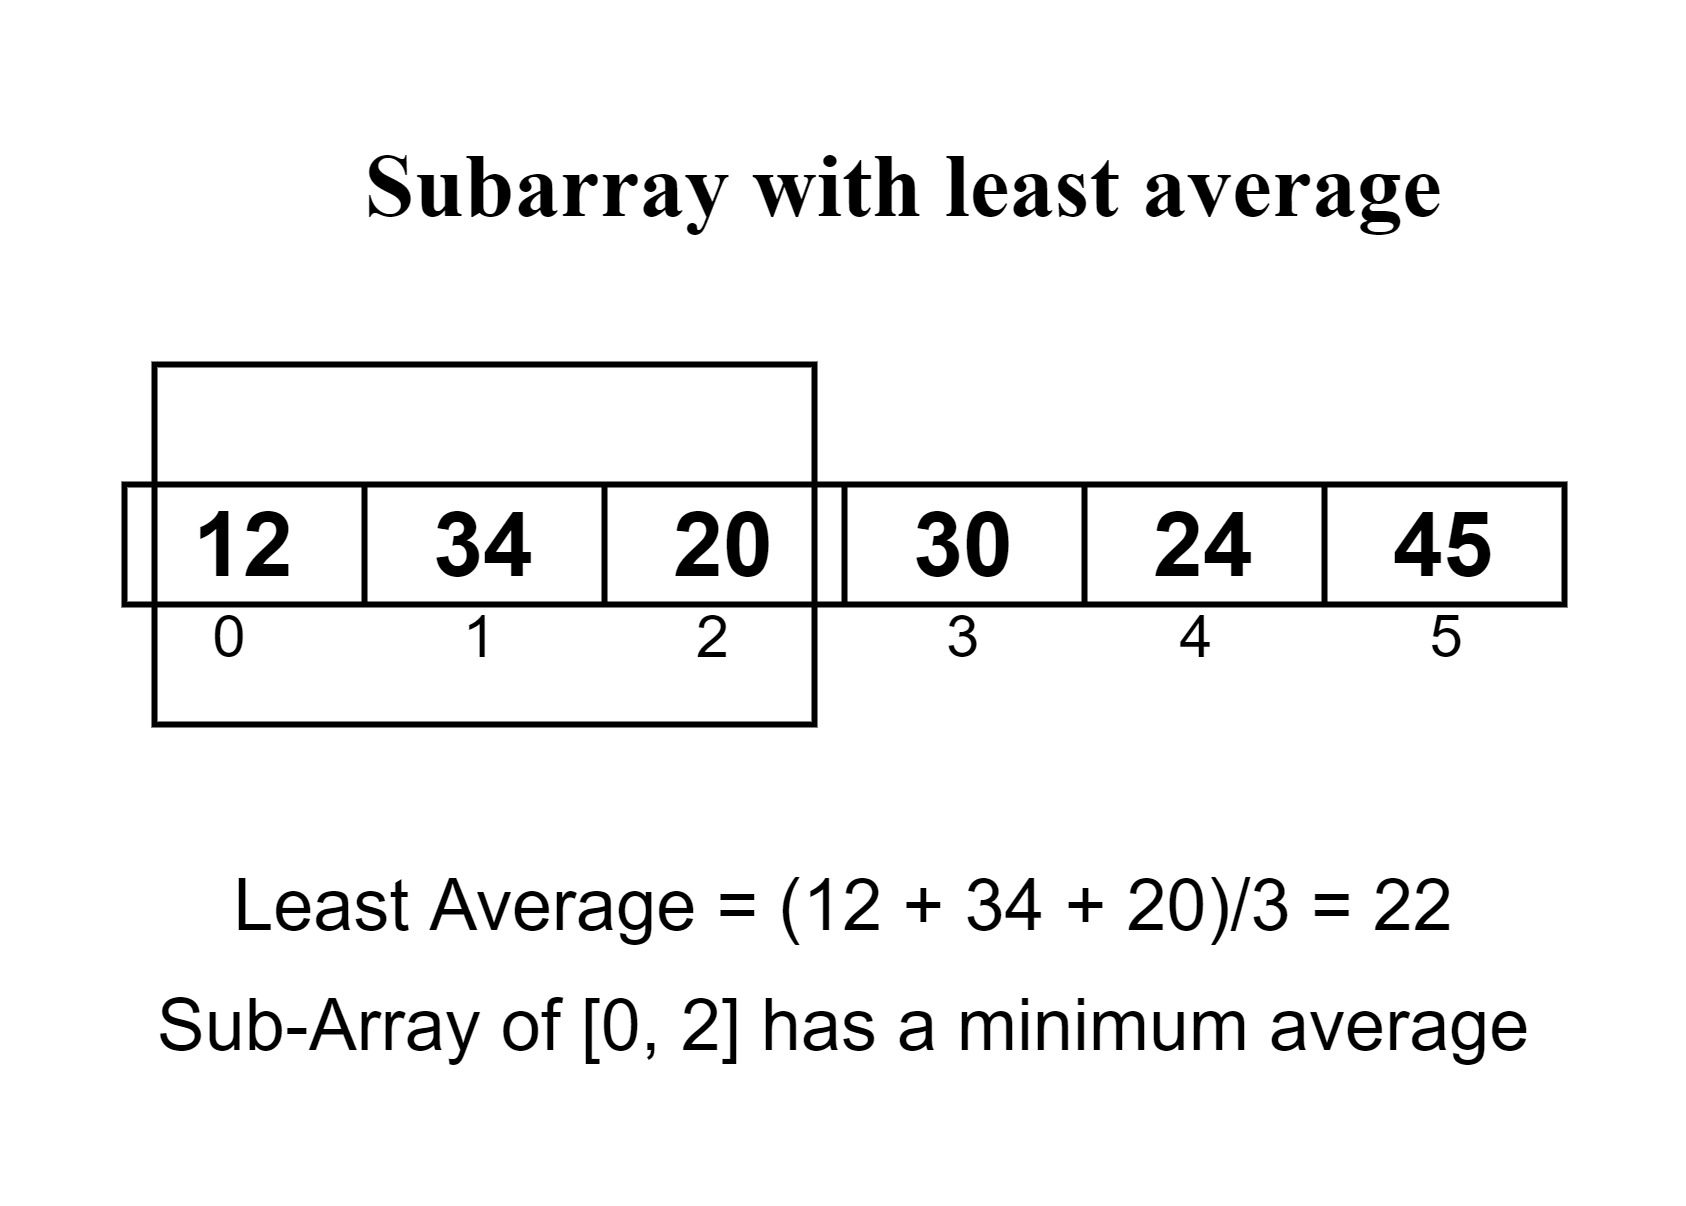 Find the subarray with least average